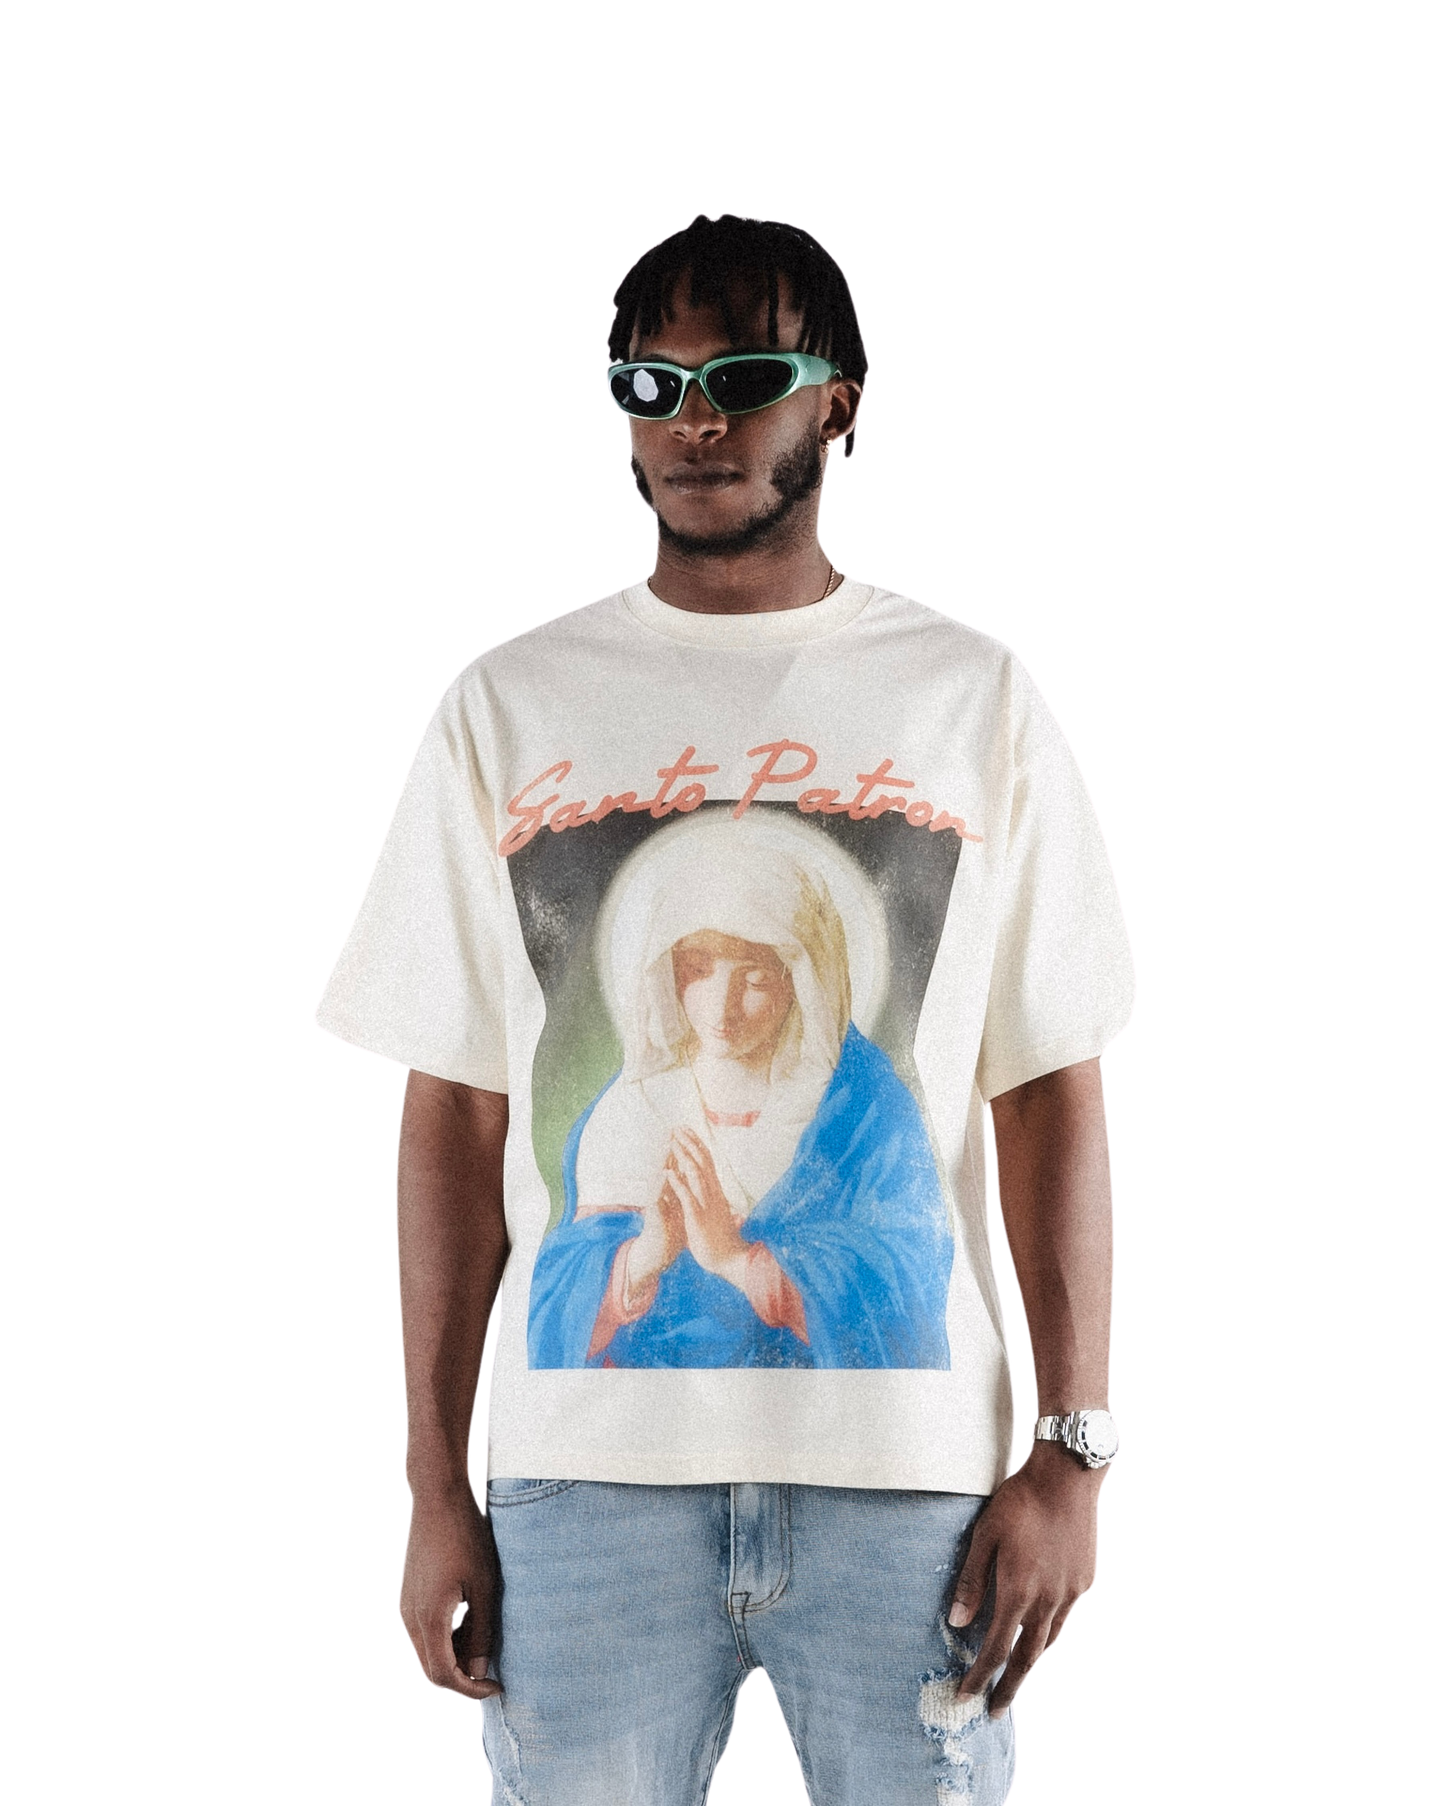 Our lady of grace Oversized tshirt